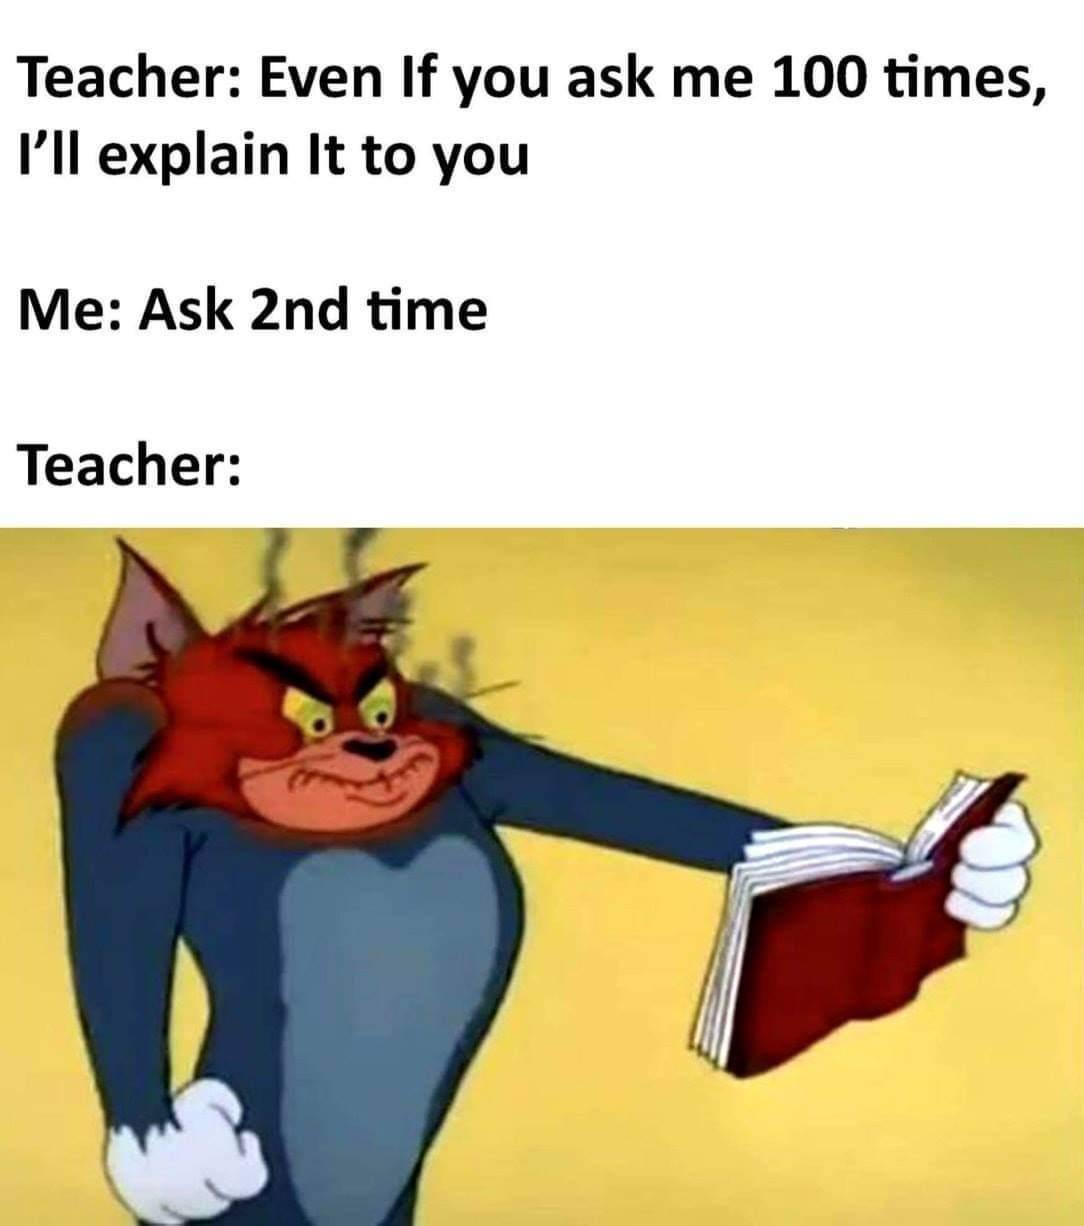 tom and jerry meme - Teacher Even If you ask me 100 times, I'll explain it to you Me Ask 2nd time Teacher